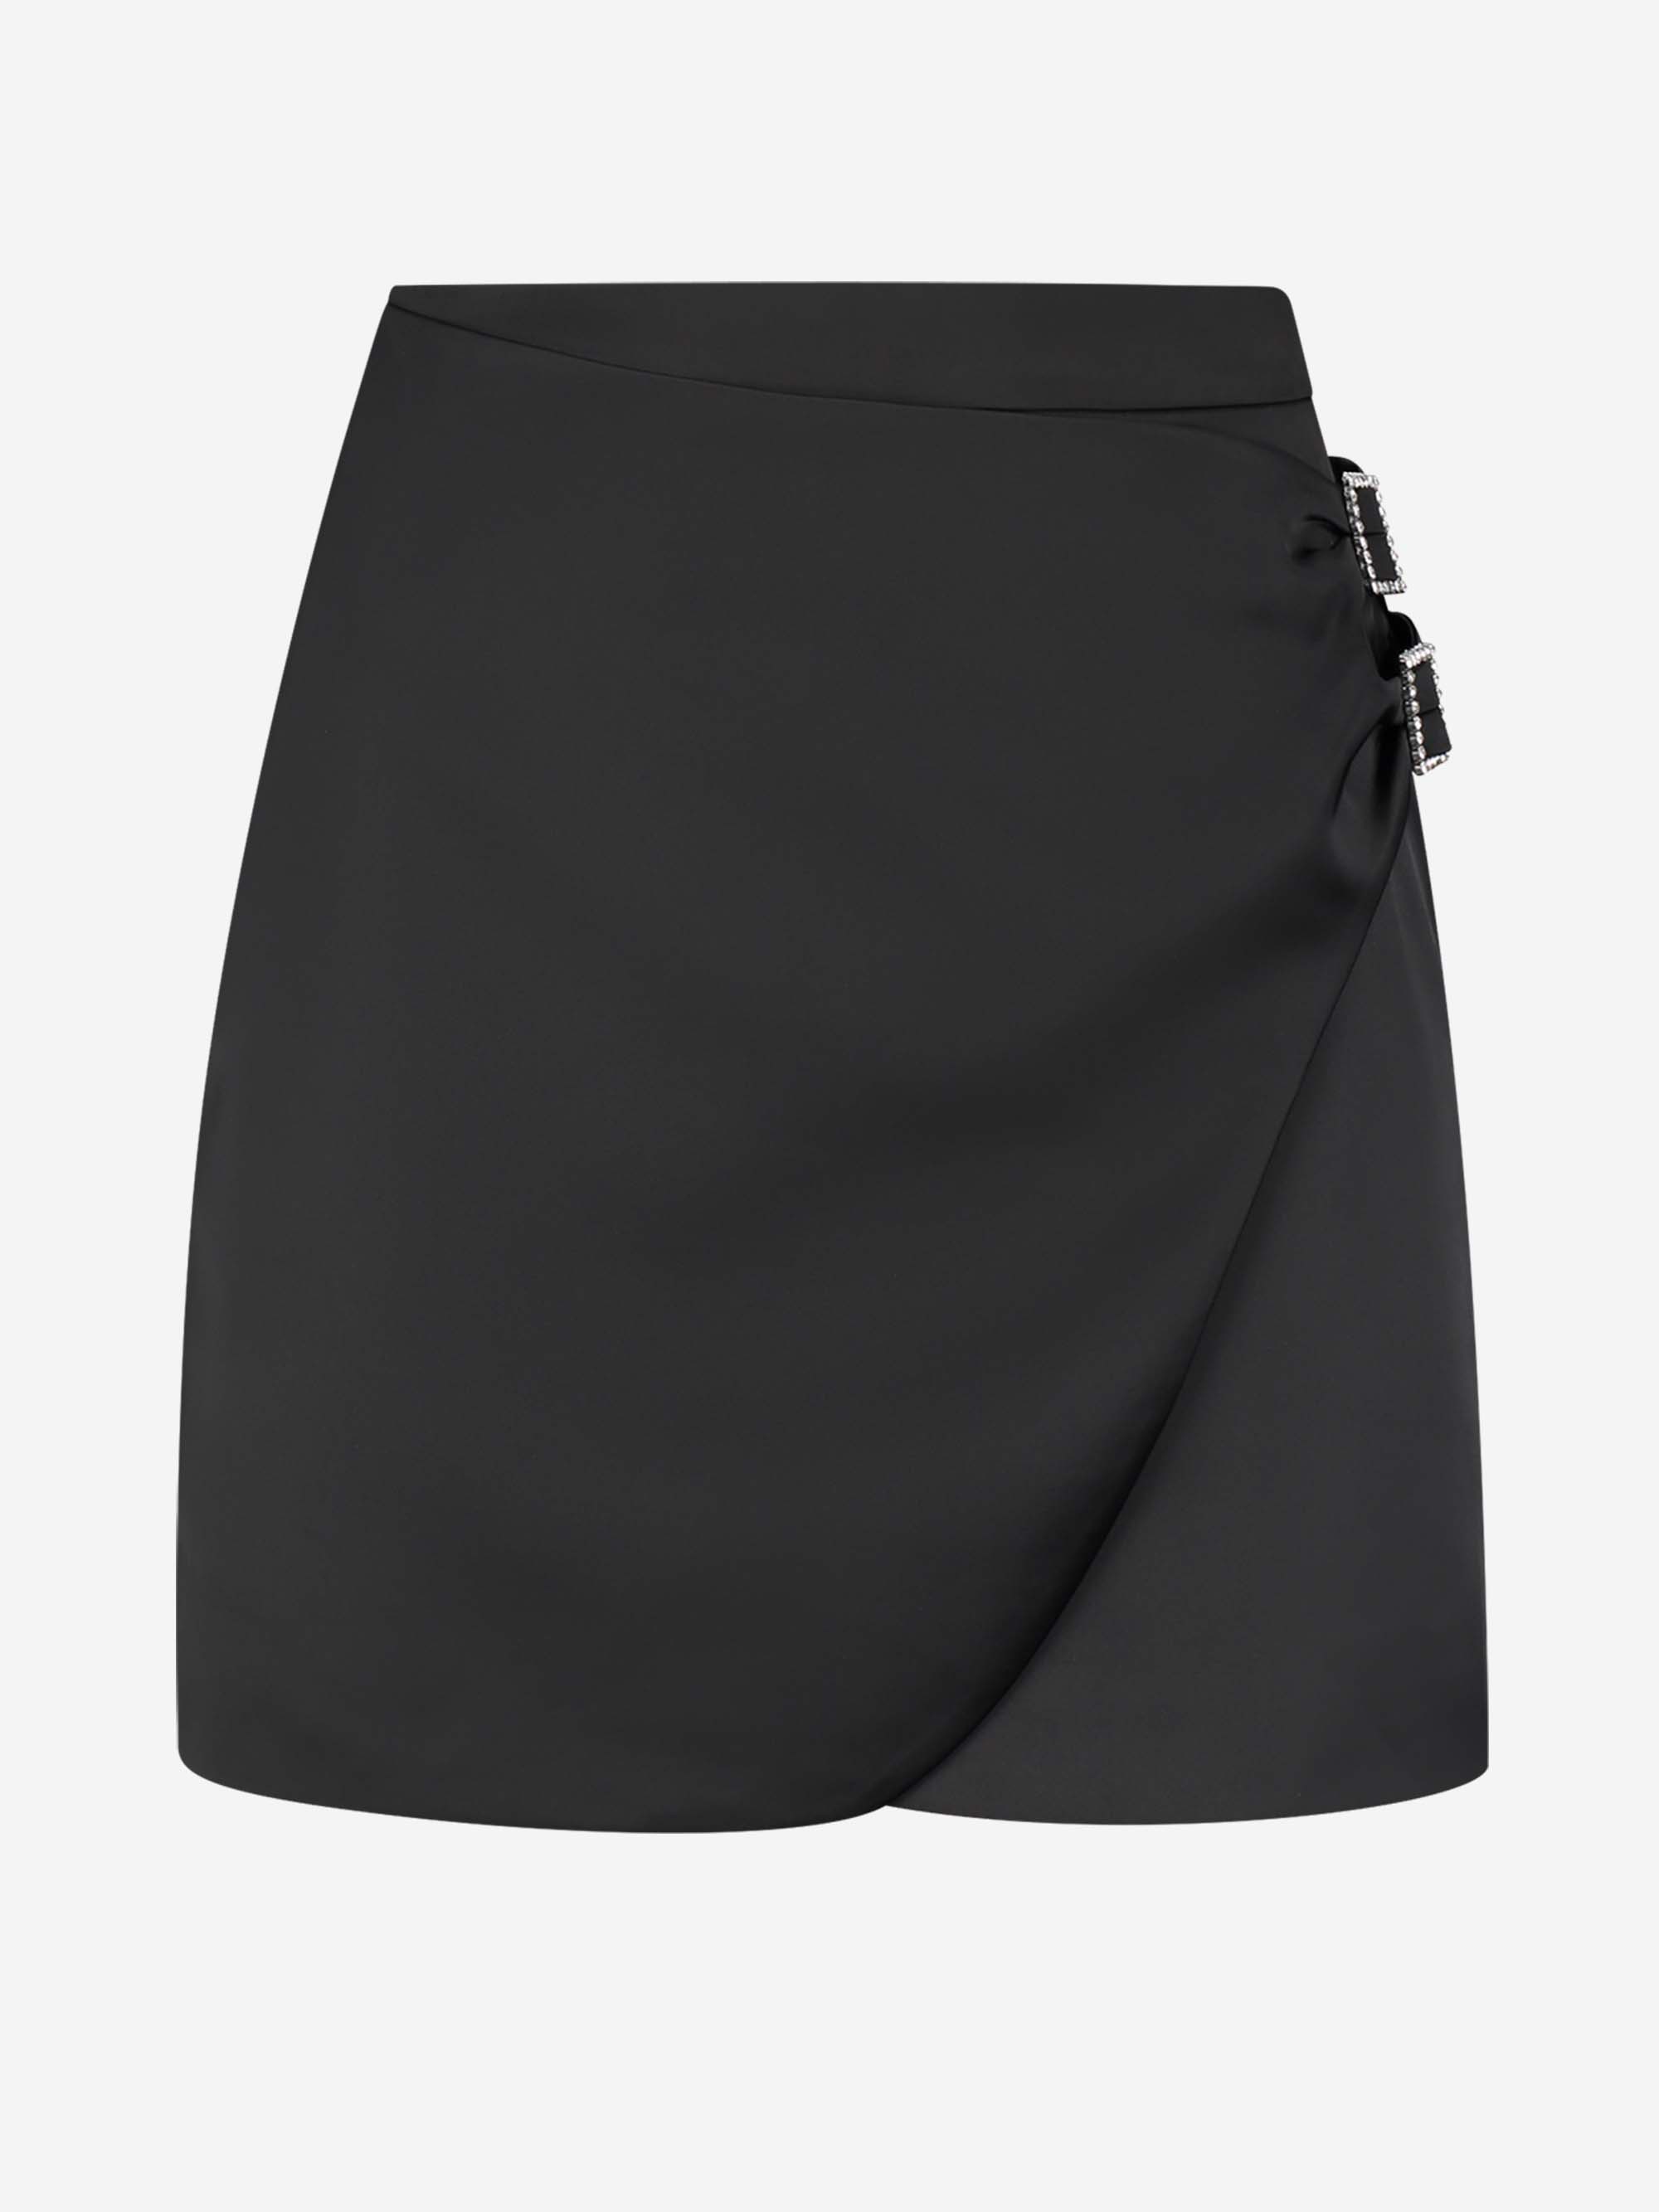 Satin look skirt with buckles 